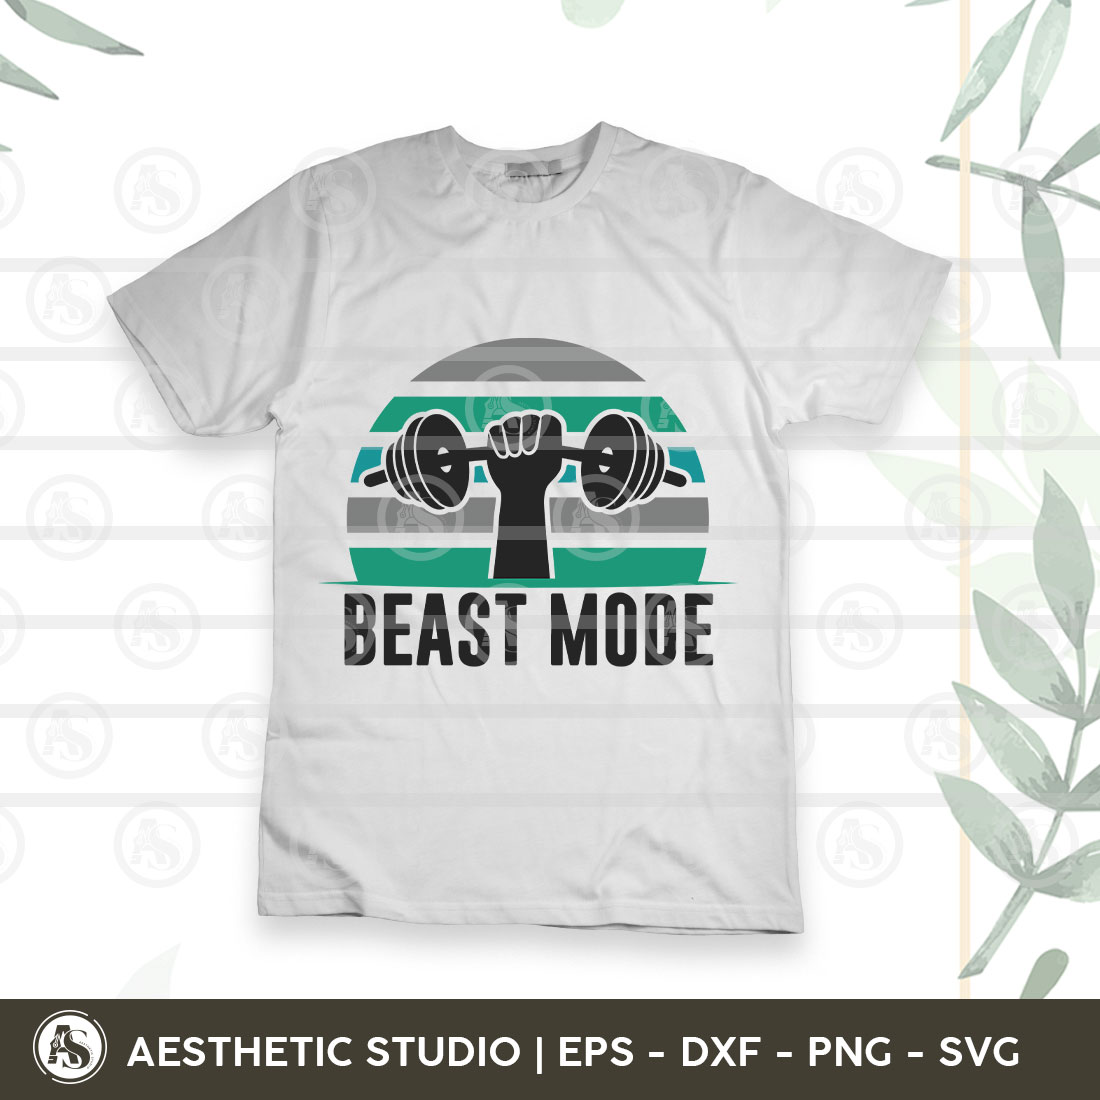 Gym Svg, Beast Mode Svg, Workout, Fitness, Weights, Gym Shirt Svg, Gift For Gym Lover, Gym Png Cut Files, Dxf, Svg, Eps preview image.